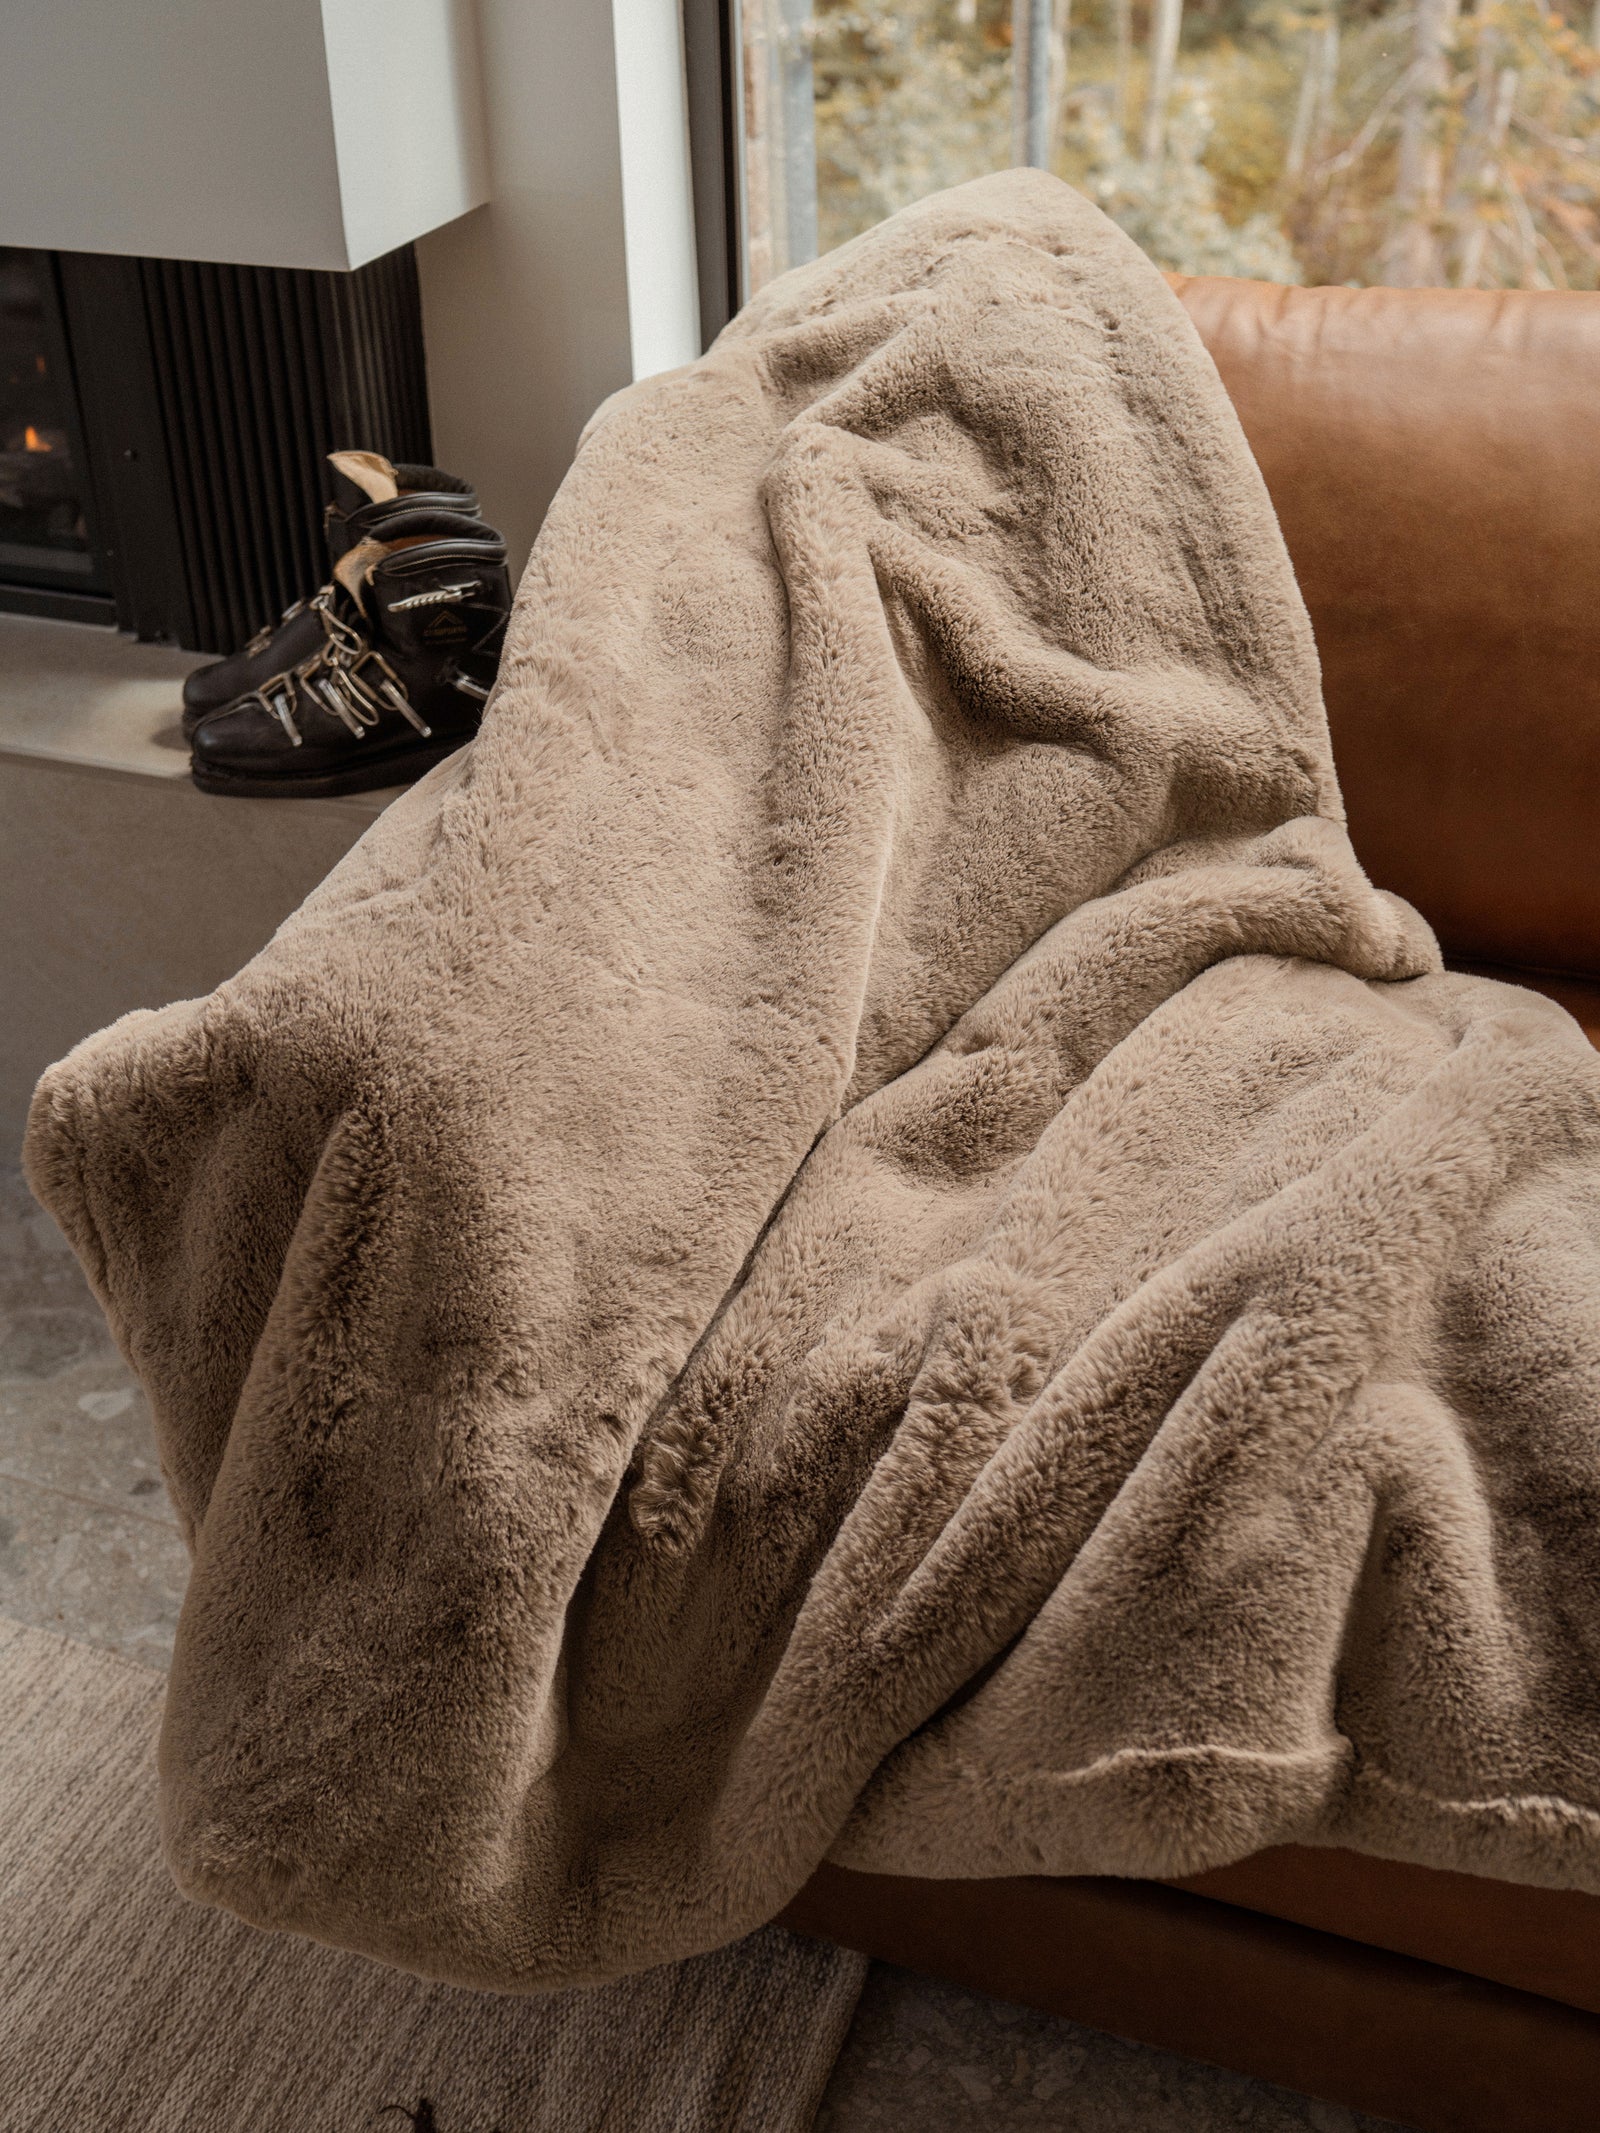 Walnut Oversized Throw Cuddle Blanket draped over couch with ski boots to the side